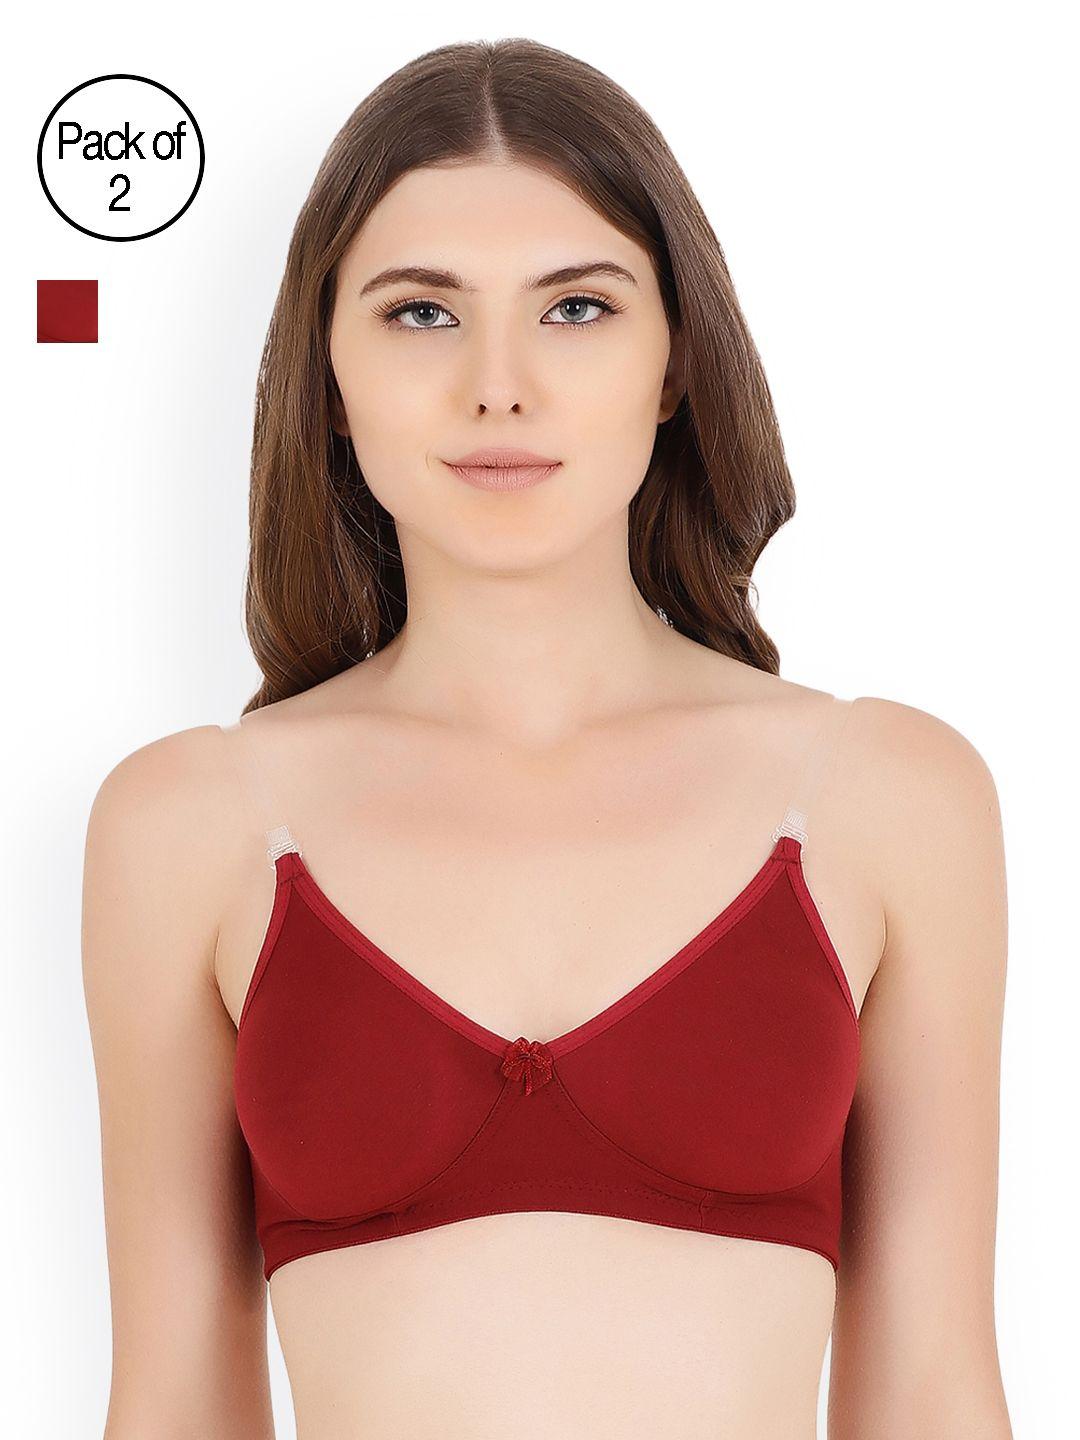 floret-pack-of-two-maroon-solid-non-wired-non-padded-t-shirt-bra-daina_maroon-maroon_40b